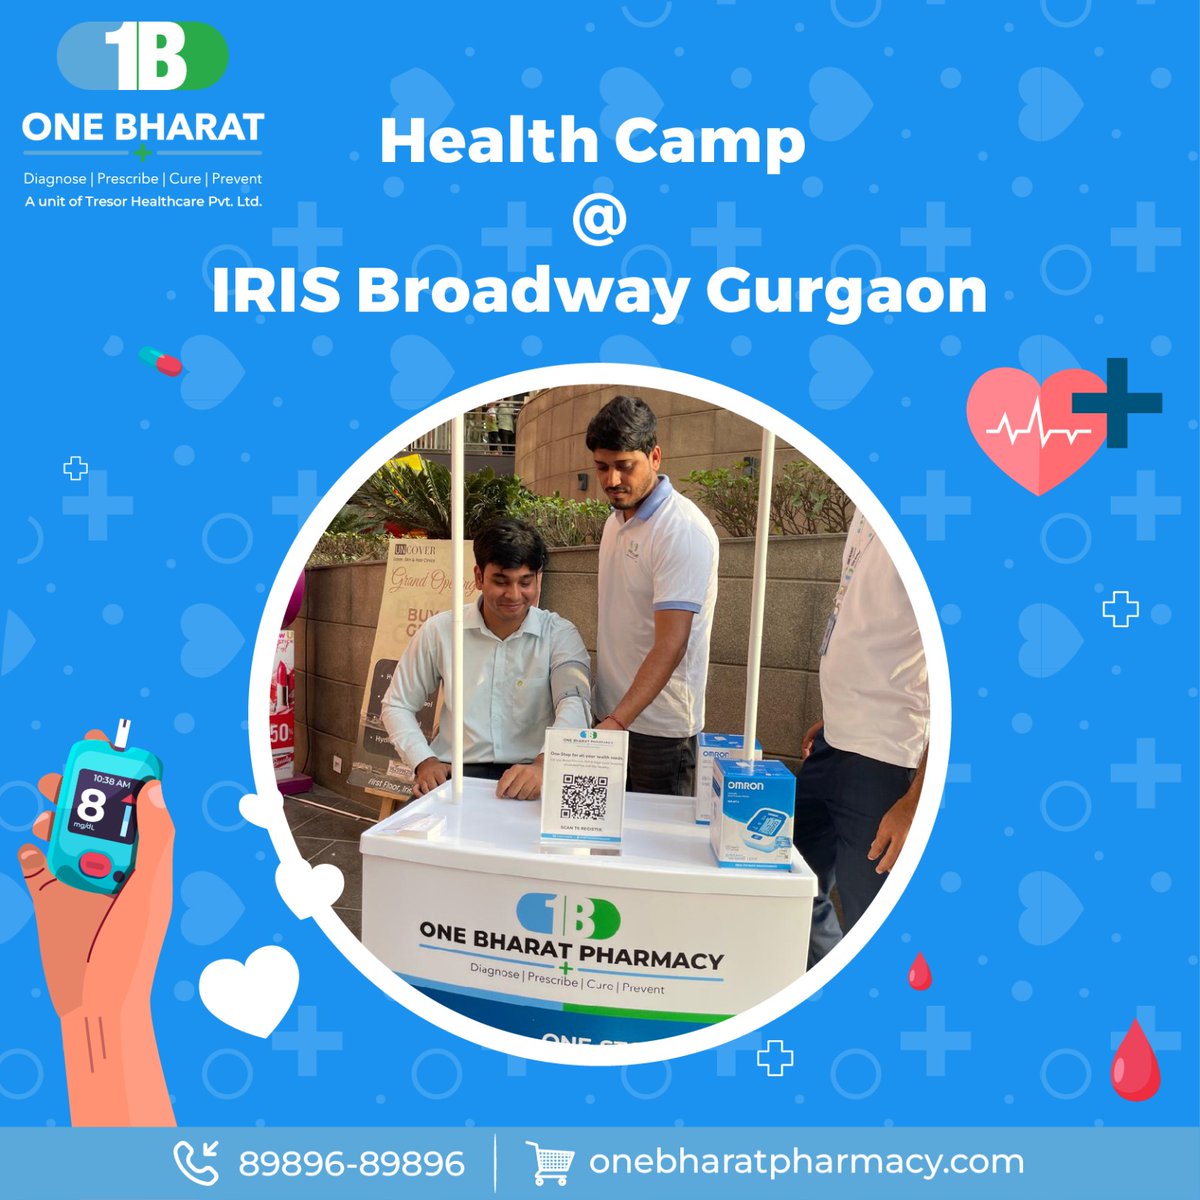 [1/2] We empower you to take charge of your health and well-being. #OneBharatPharmacy recently organised a #healthcamp at the IRIS Broadway, Gurgaon, where free services like BP & sugar level screening were available for visitors. We are elated to receive such a great response.